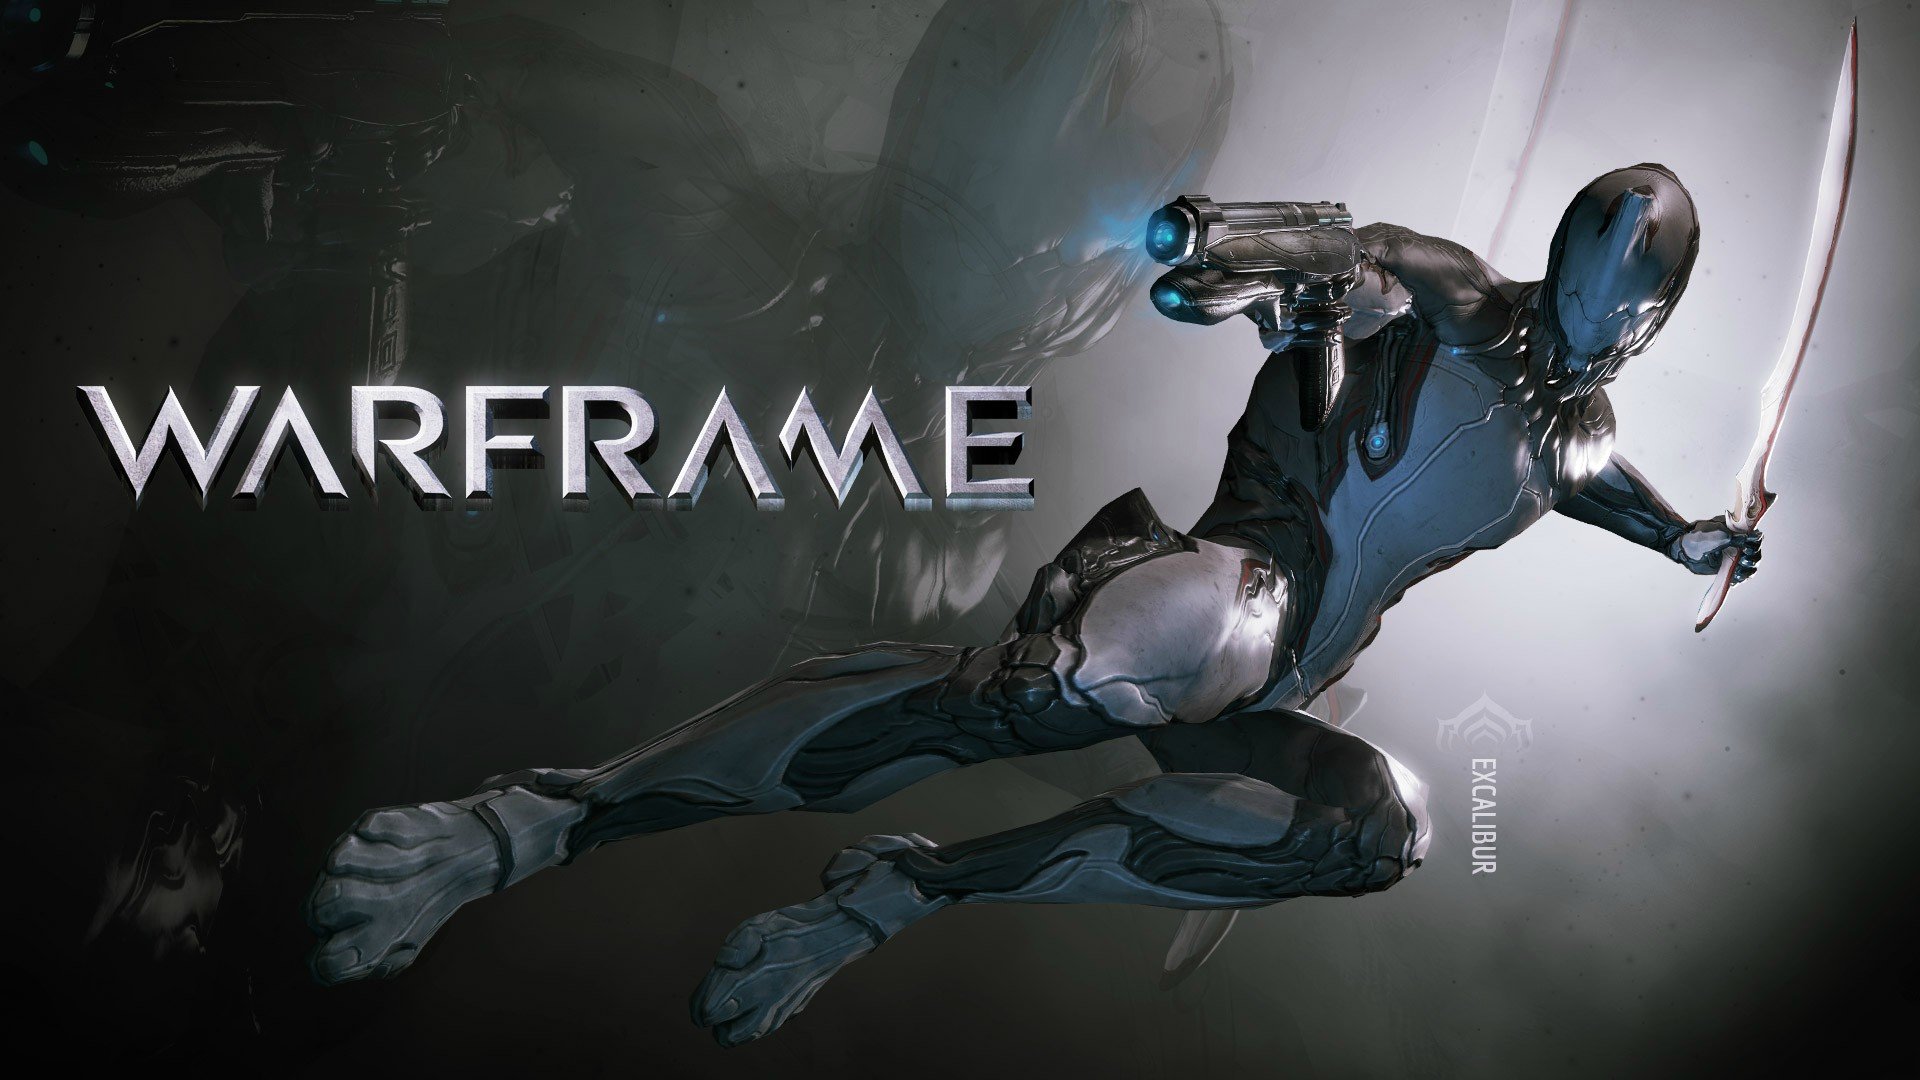 Awesome Warframe free background ID:239373 for hd 1920x1080 desktop